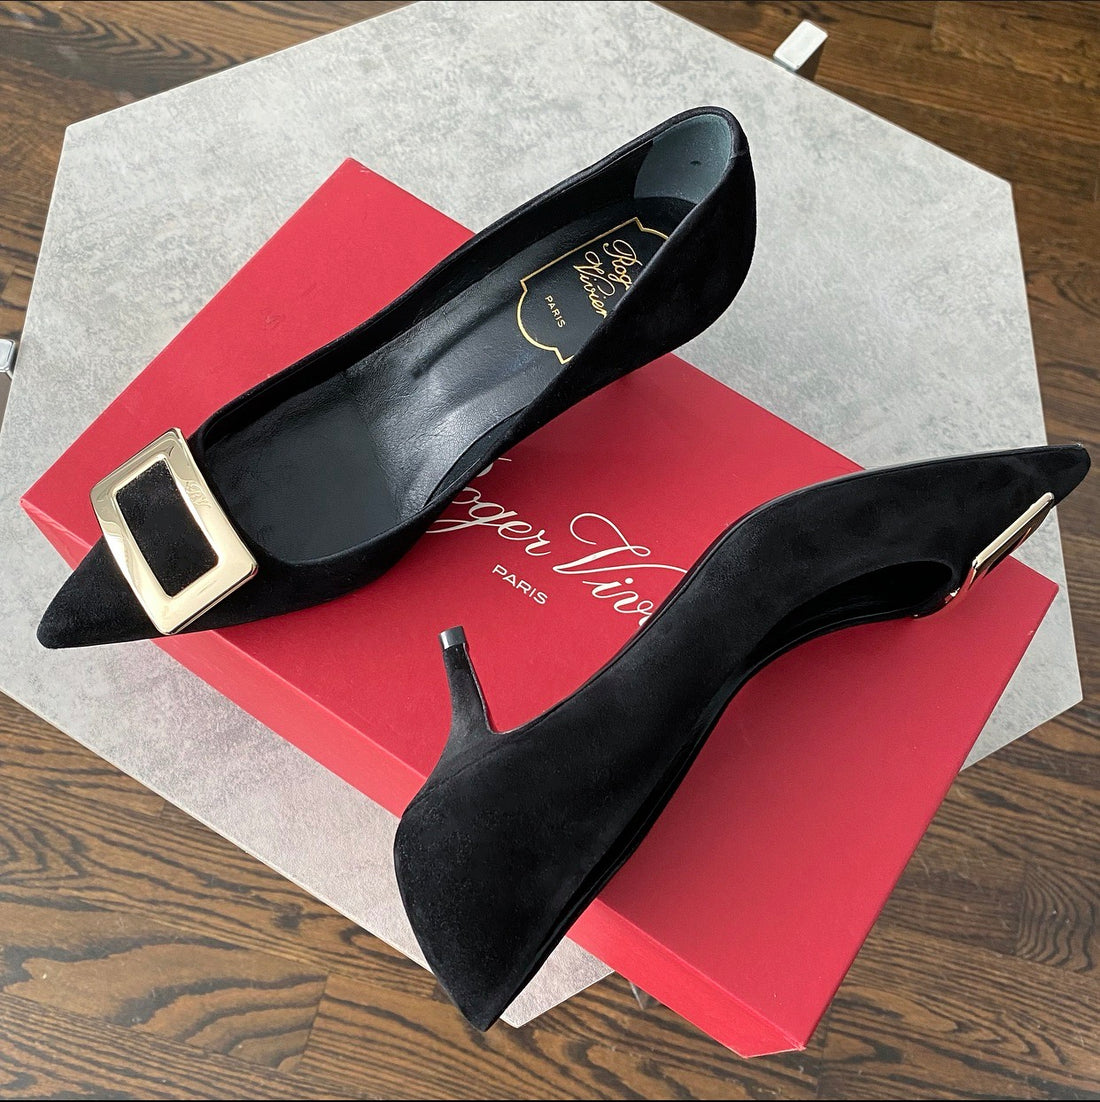 Roger Vivier Black Suede Pumps with Gold Buckle - USA 5.5